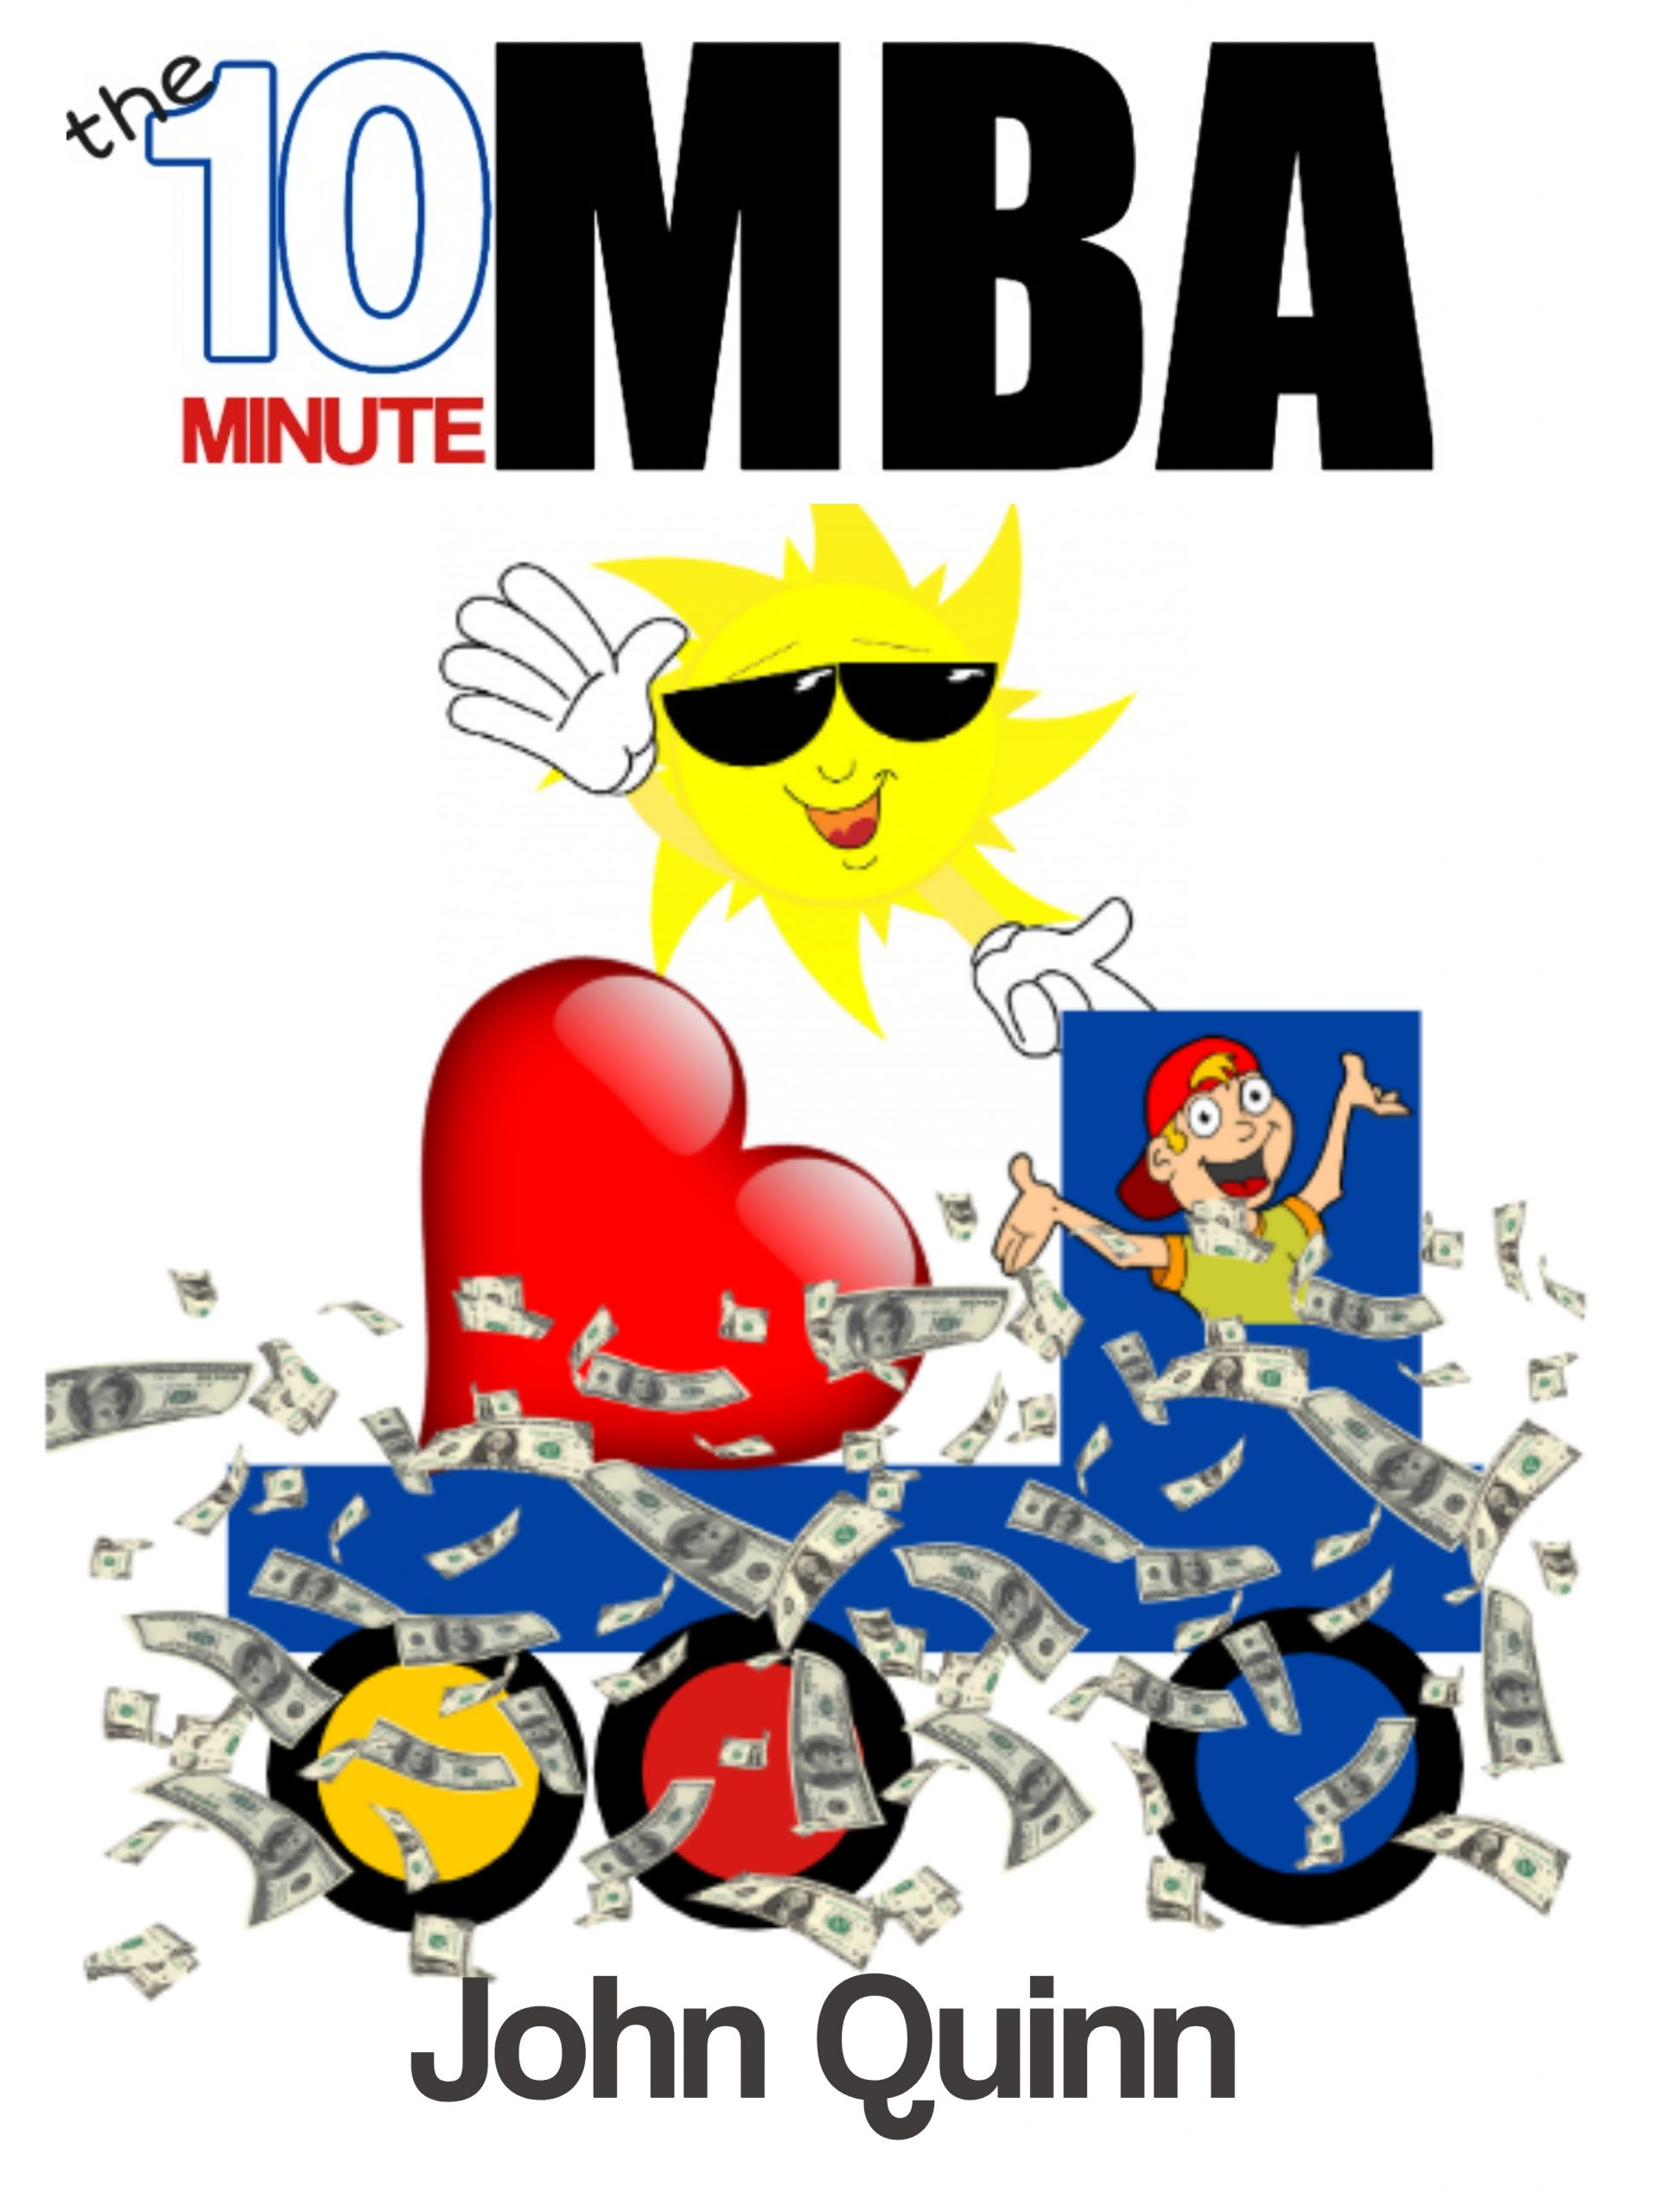 10 minute mba